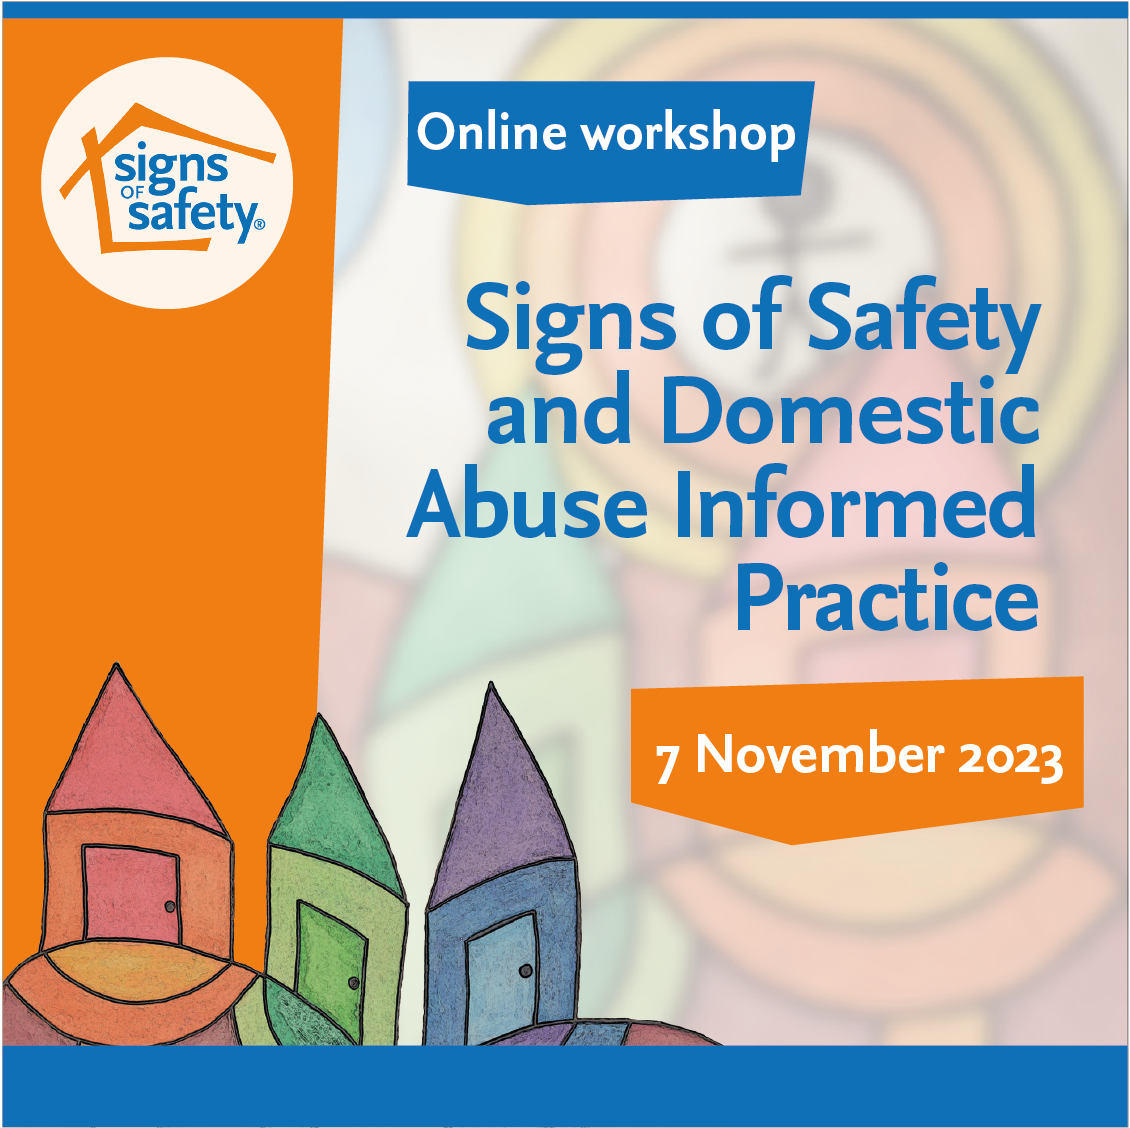 Signs of Safety and Domestic Abuse Informed Practice Workshop